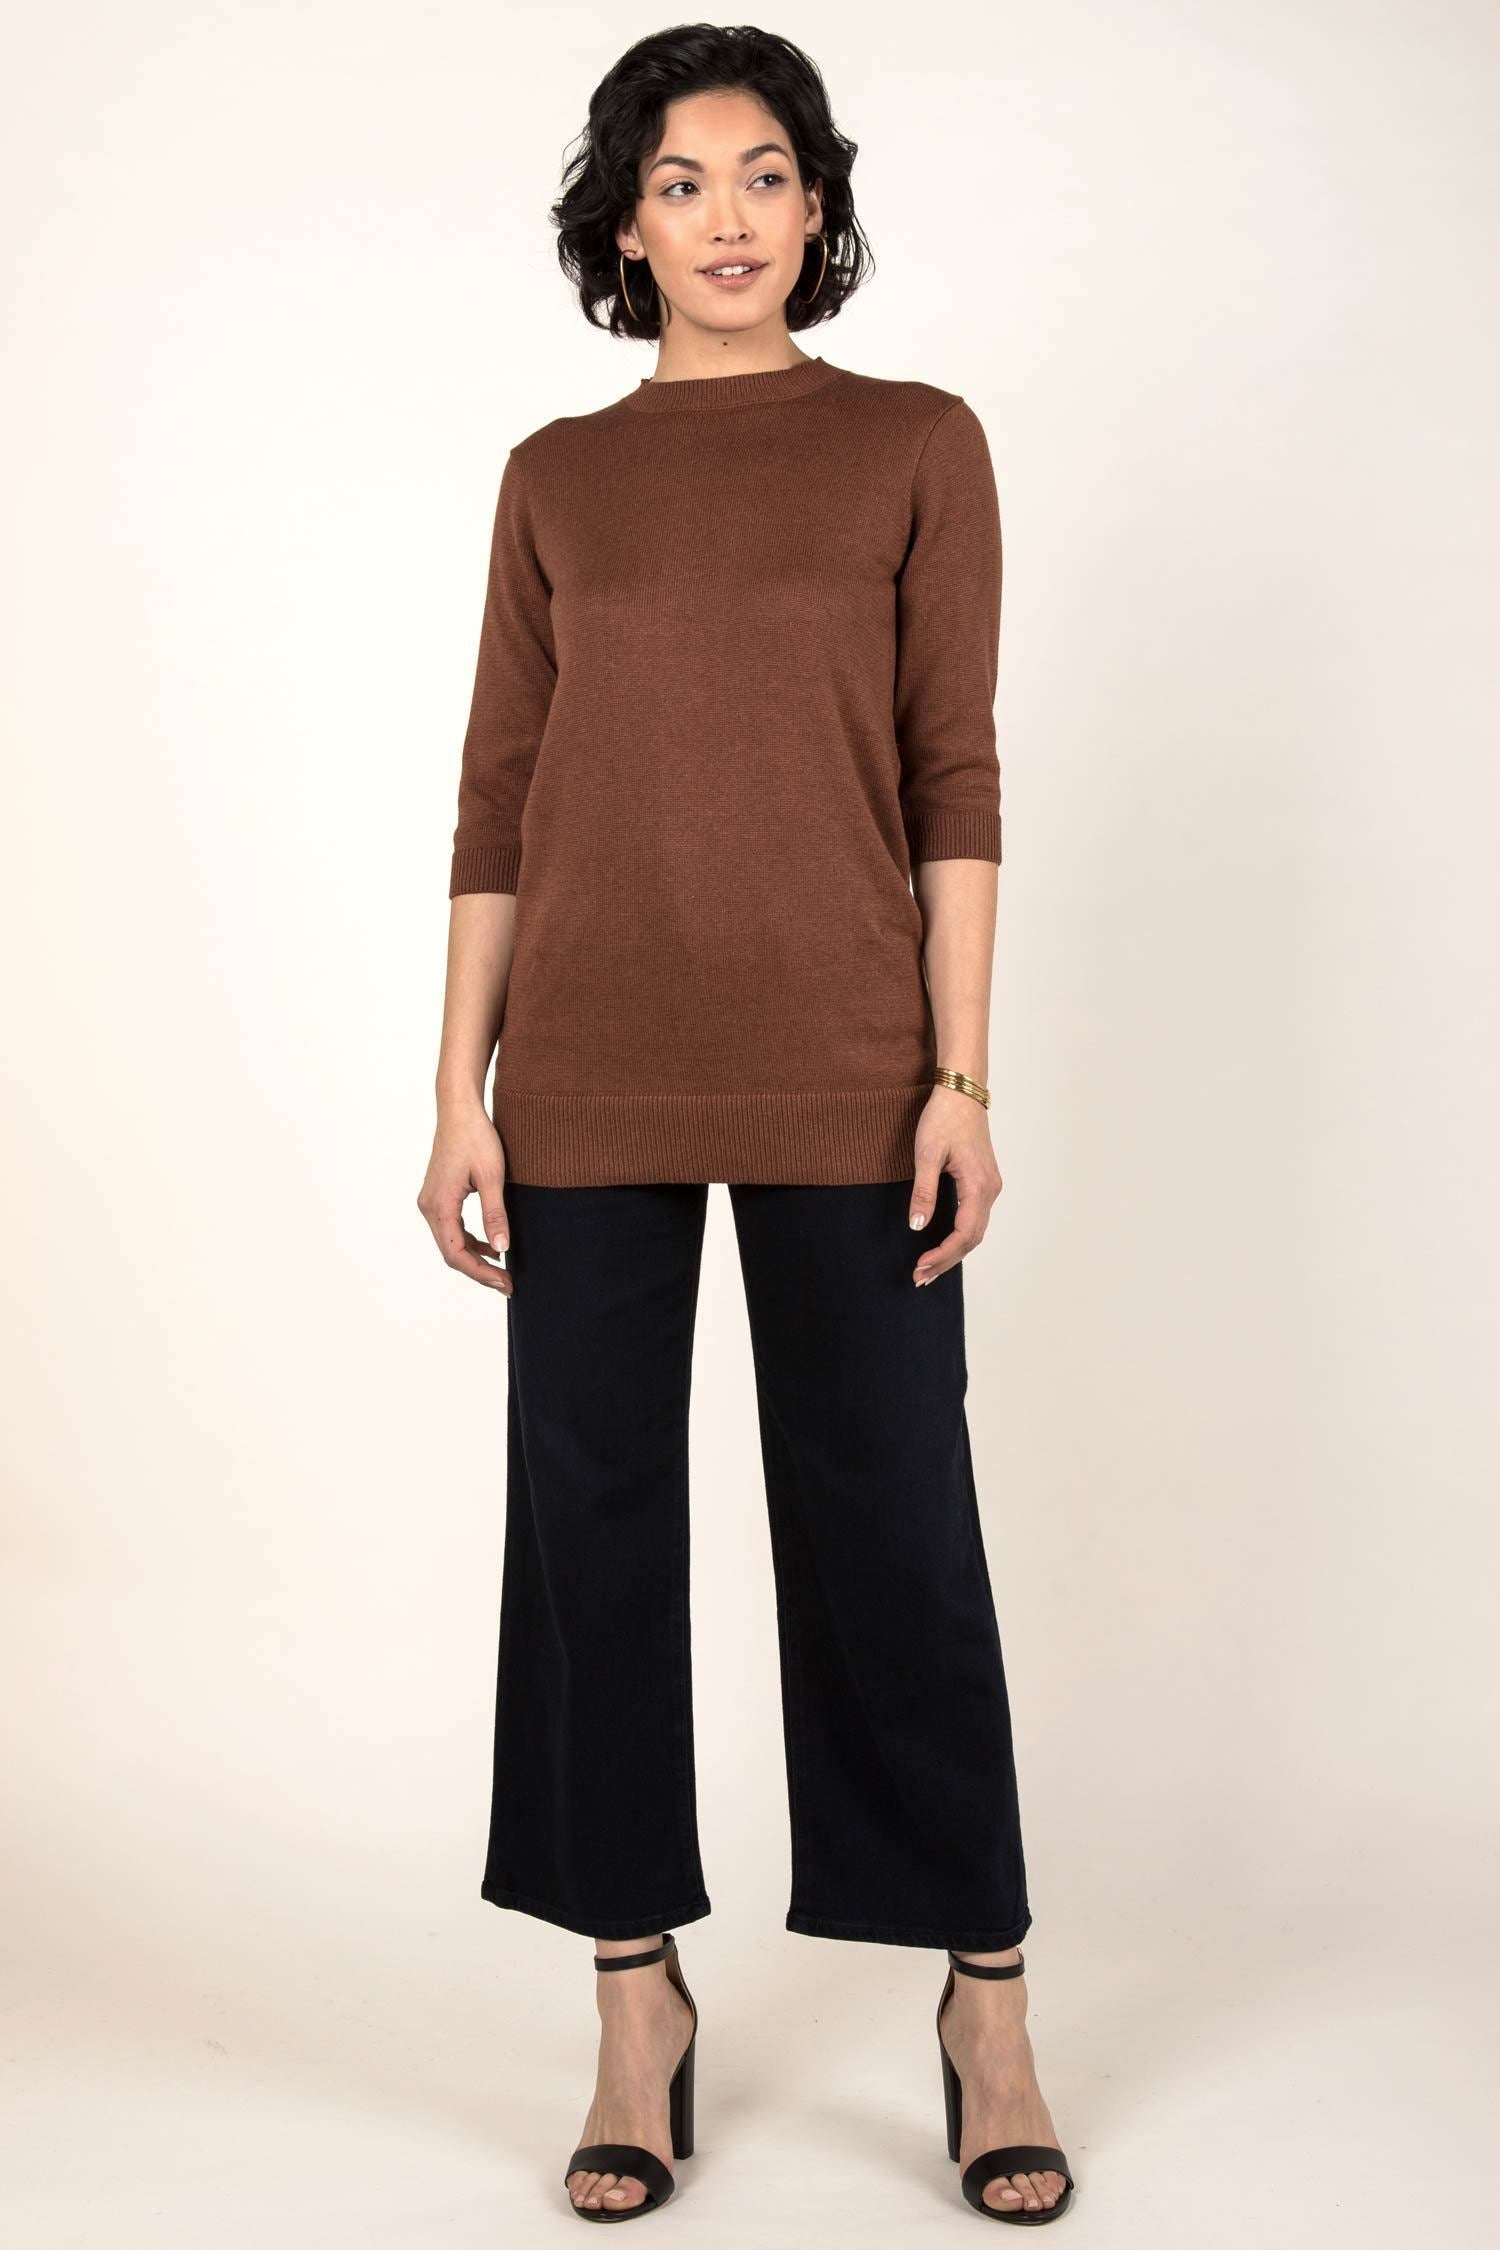 Womens Organic Cotton Top | Knit Elbow Sleeve Tunic Sweater | Cayenne Brown